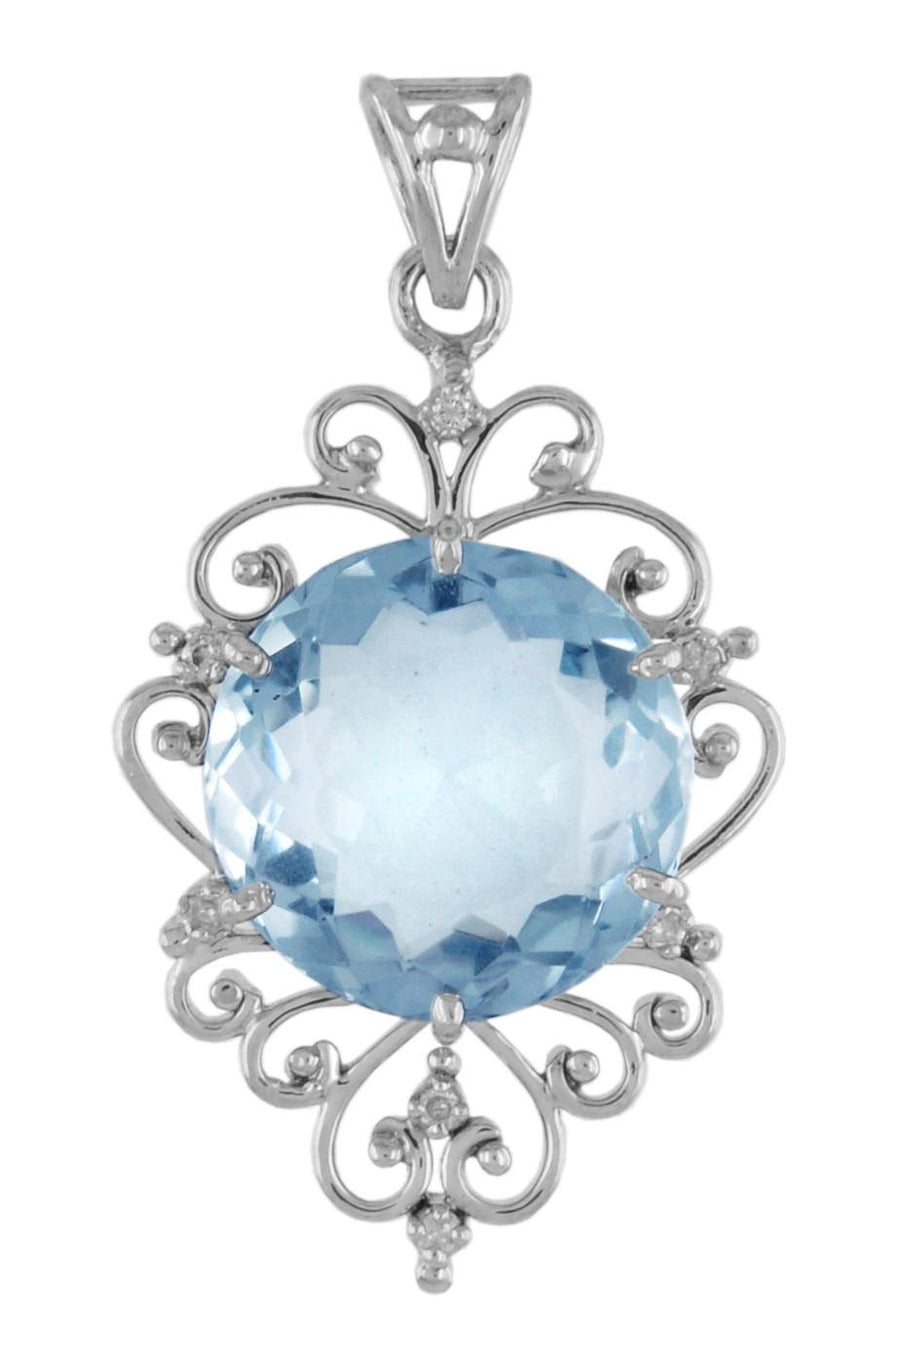 20cts Blue Topaz Pendant in Sterling Silver With White Diamond Accents - ZeeDiamonds